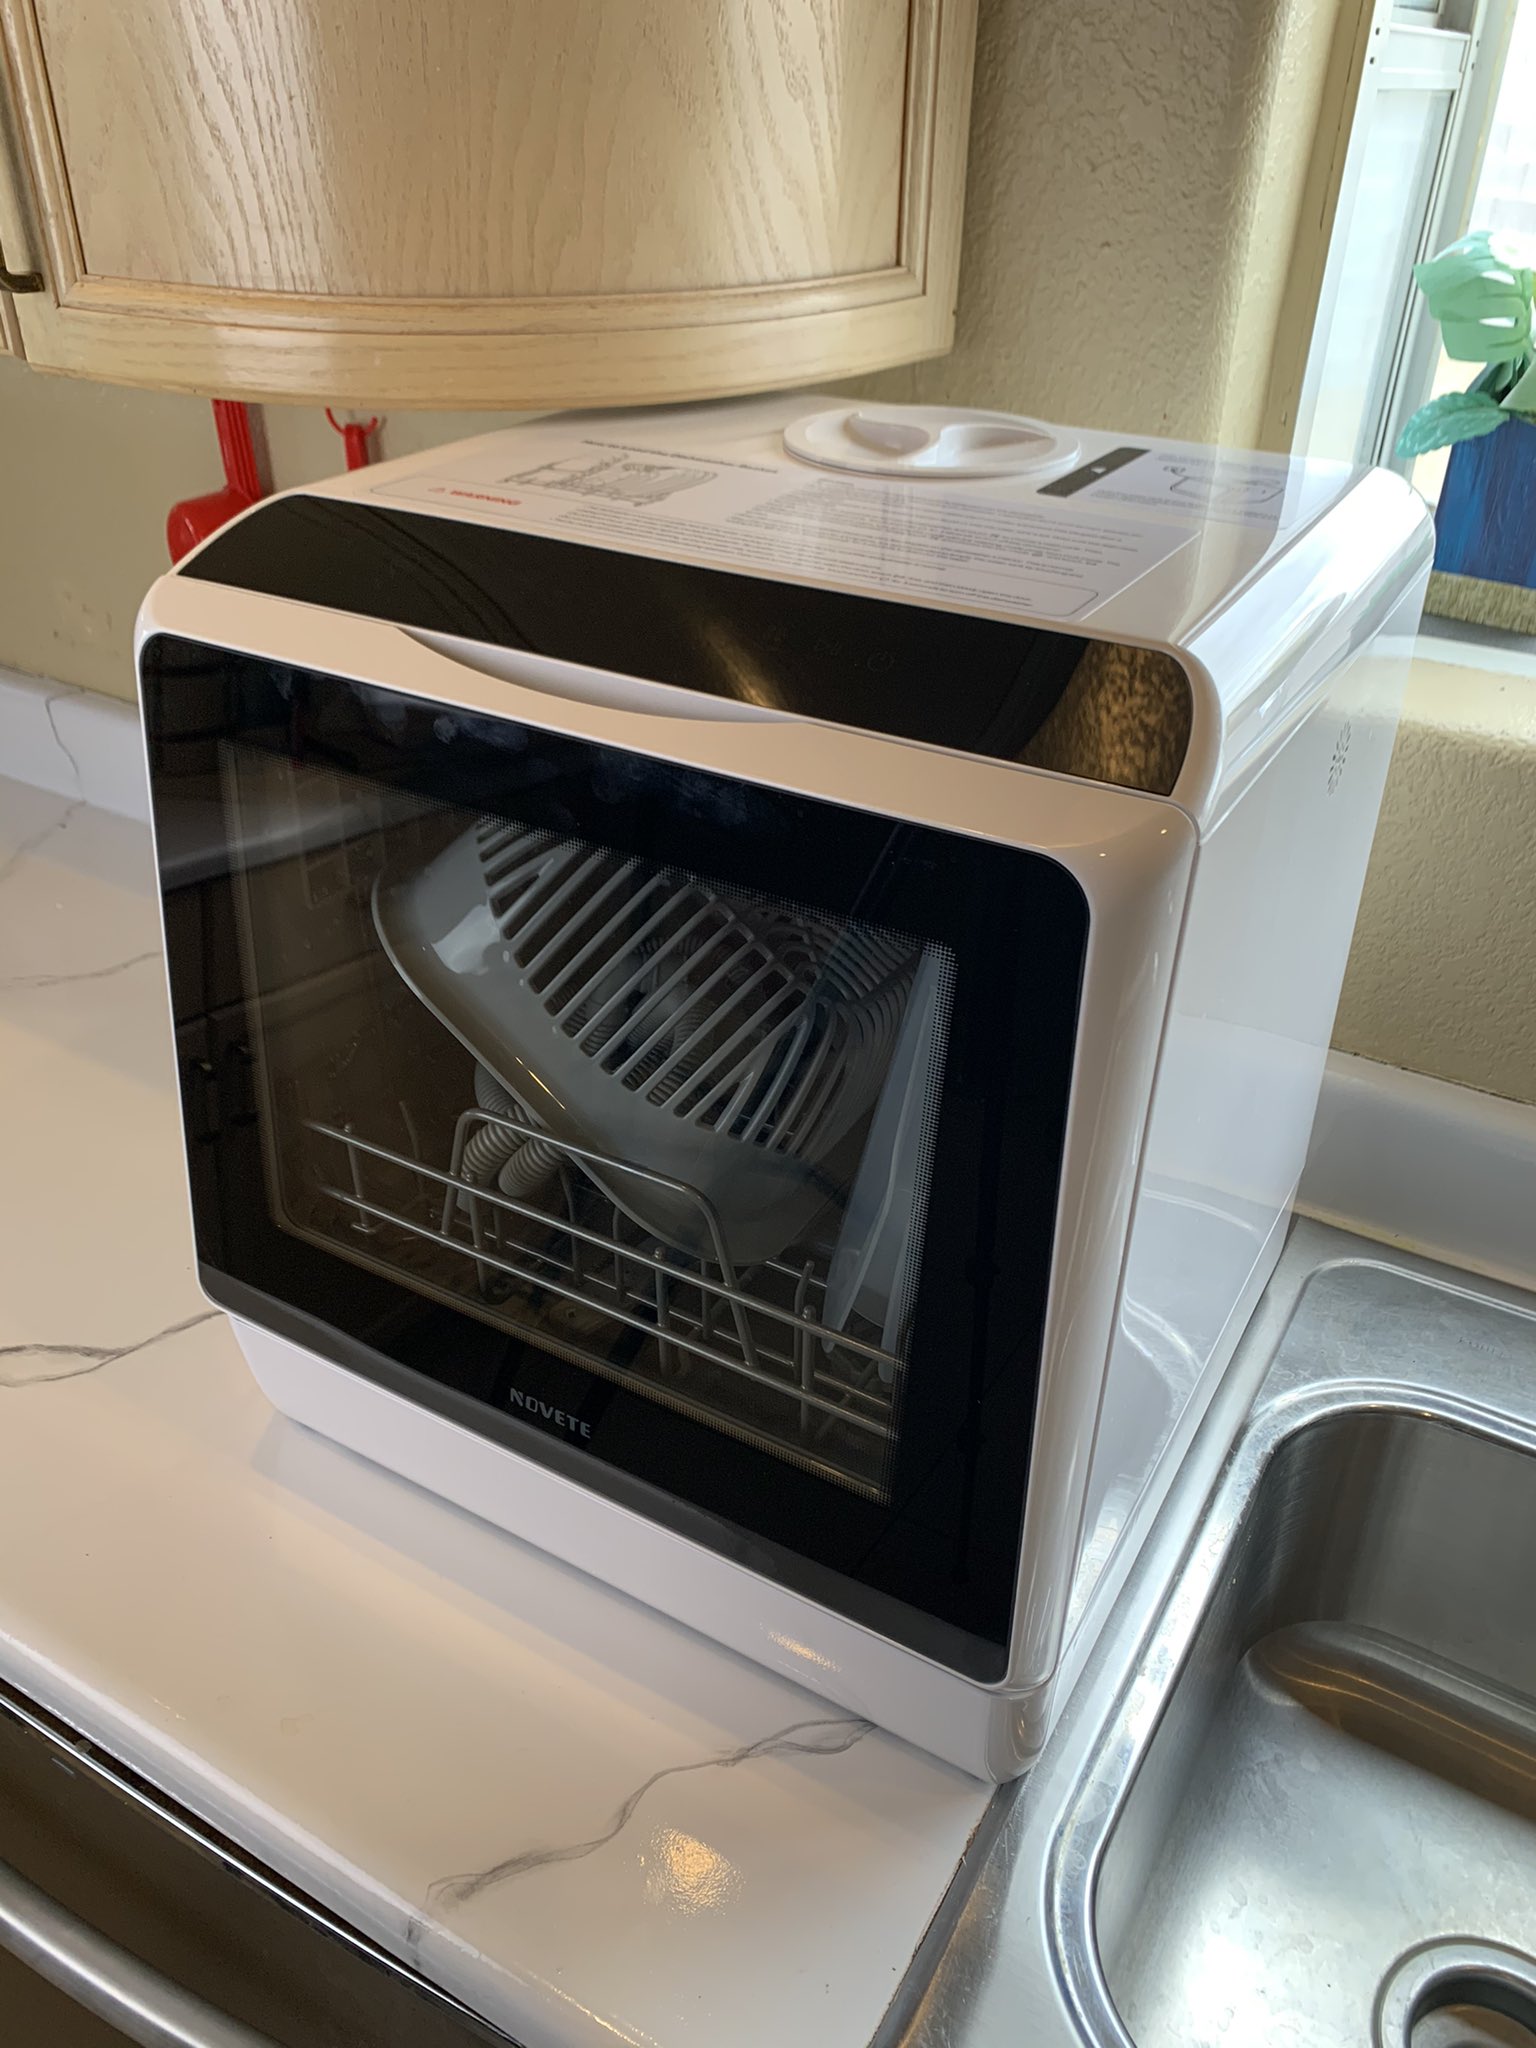 Freakin' Reviews on X: Finally reviewing a countertop dishwasher. Just  pulled it out of the box and about to fire it up.   / X